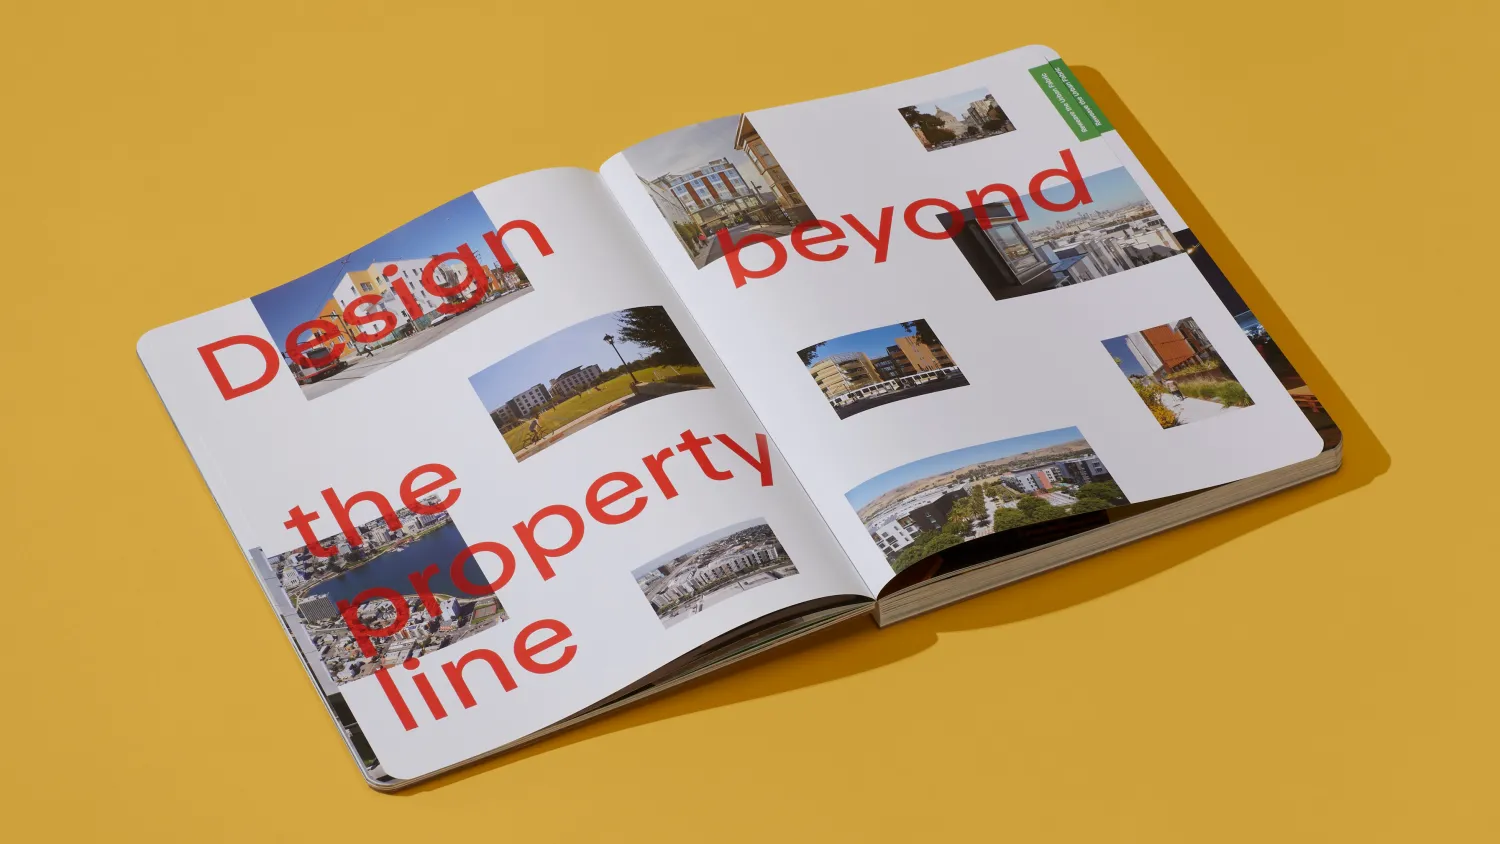 9 Ways Book Spread opened on the page with text: "Design Beyond the Property Line"